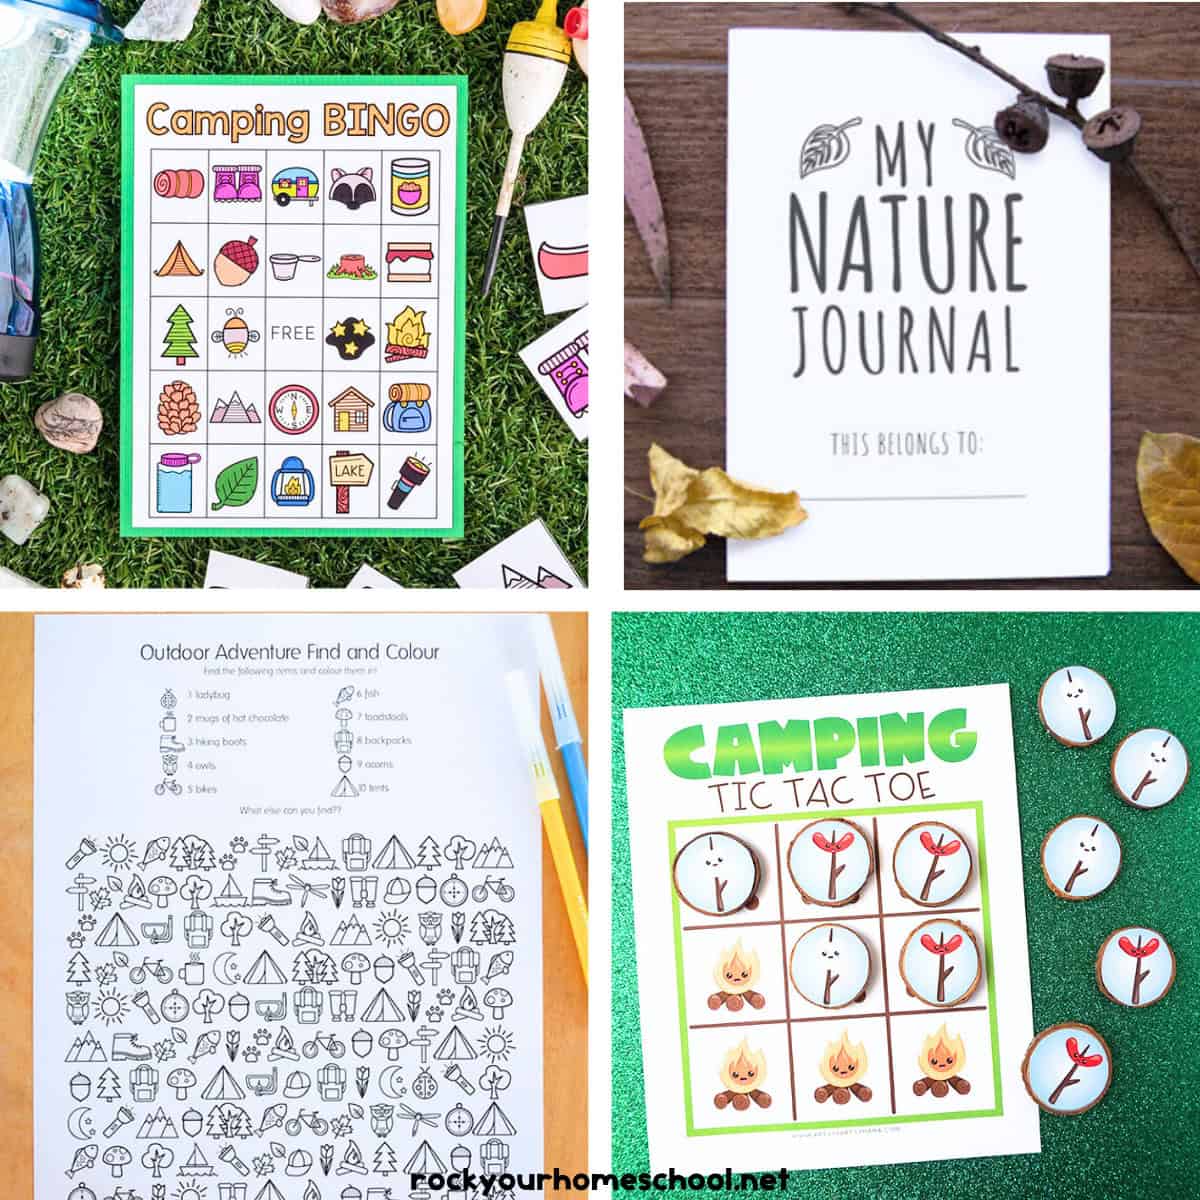 Four examples of camping printables for kids with bingo, nature journal, I Spy, and tic-tac-toe.